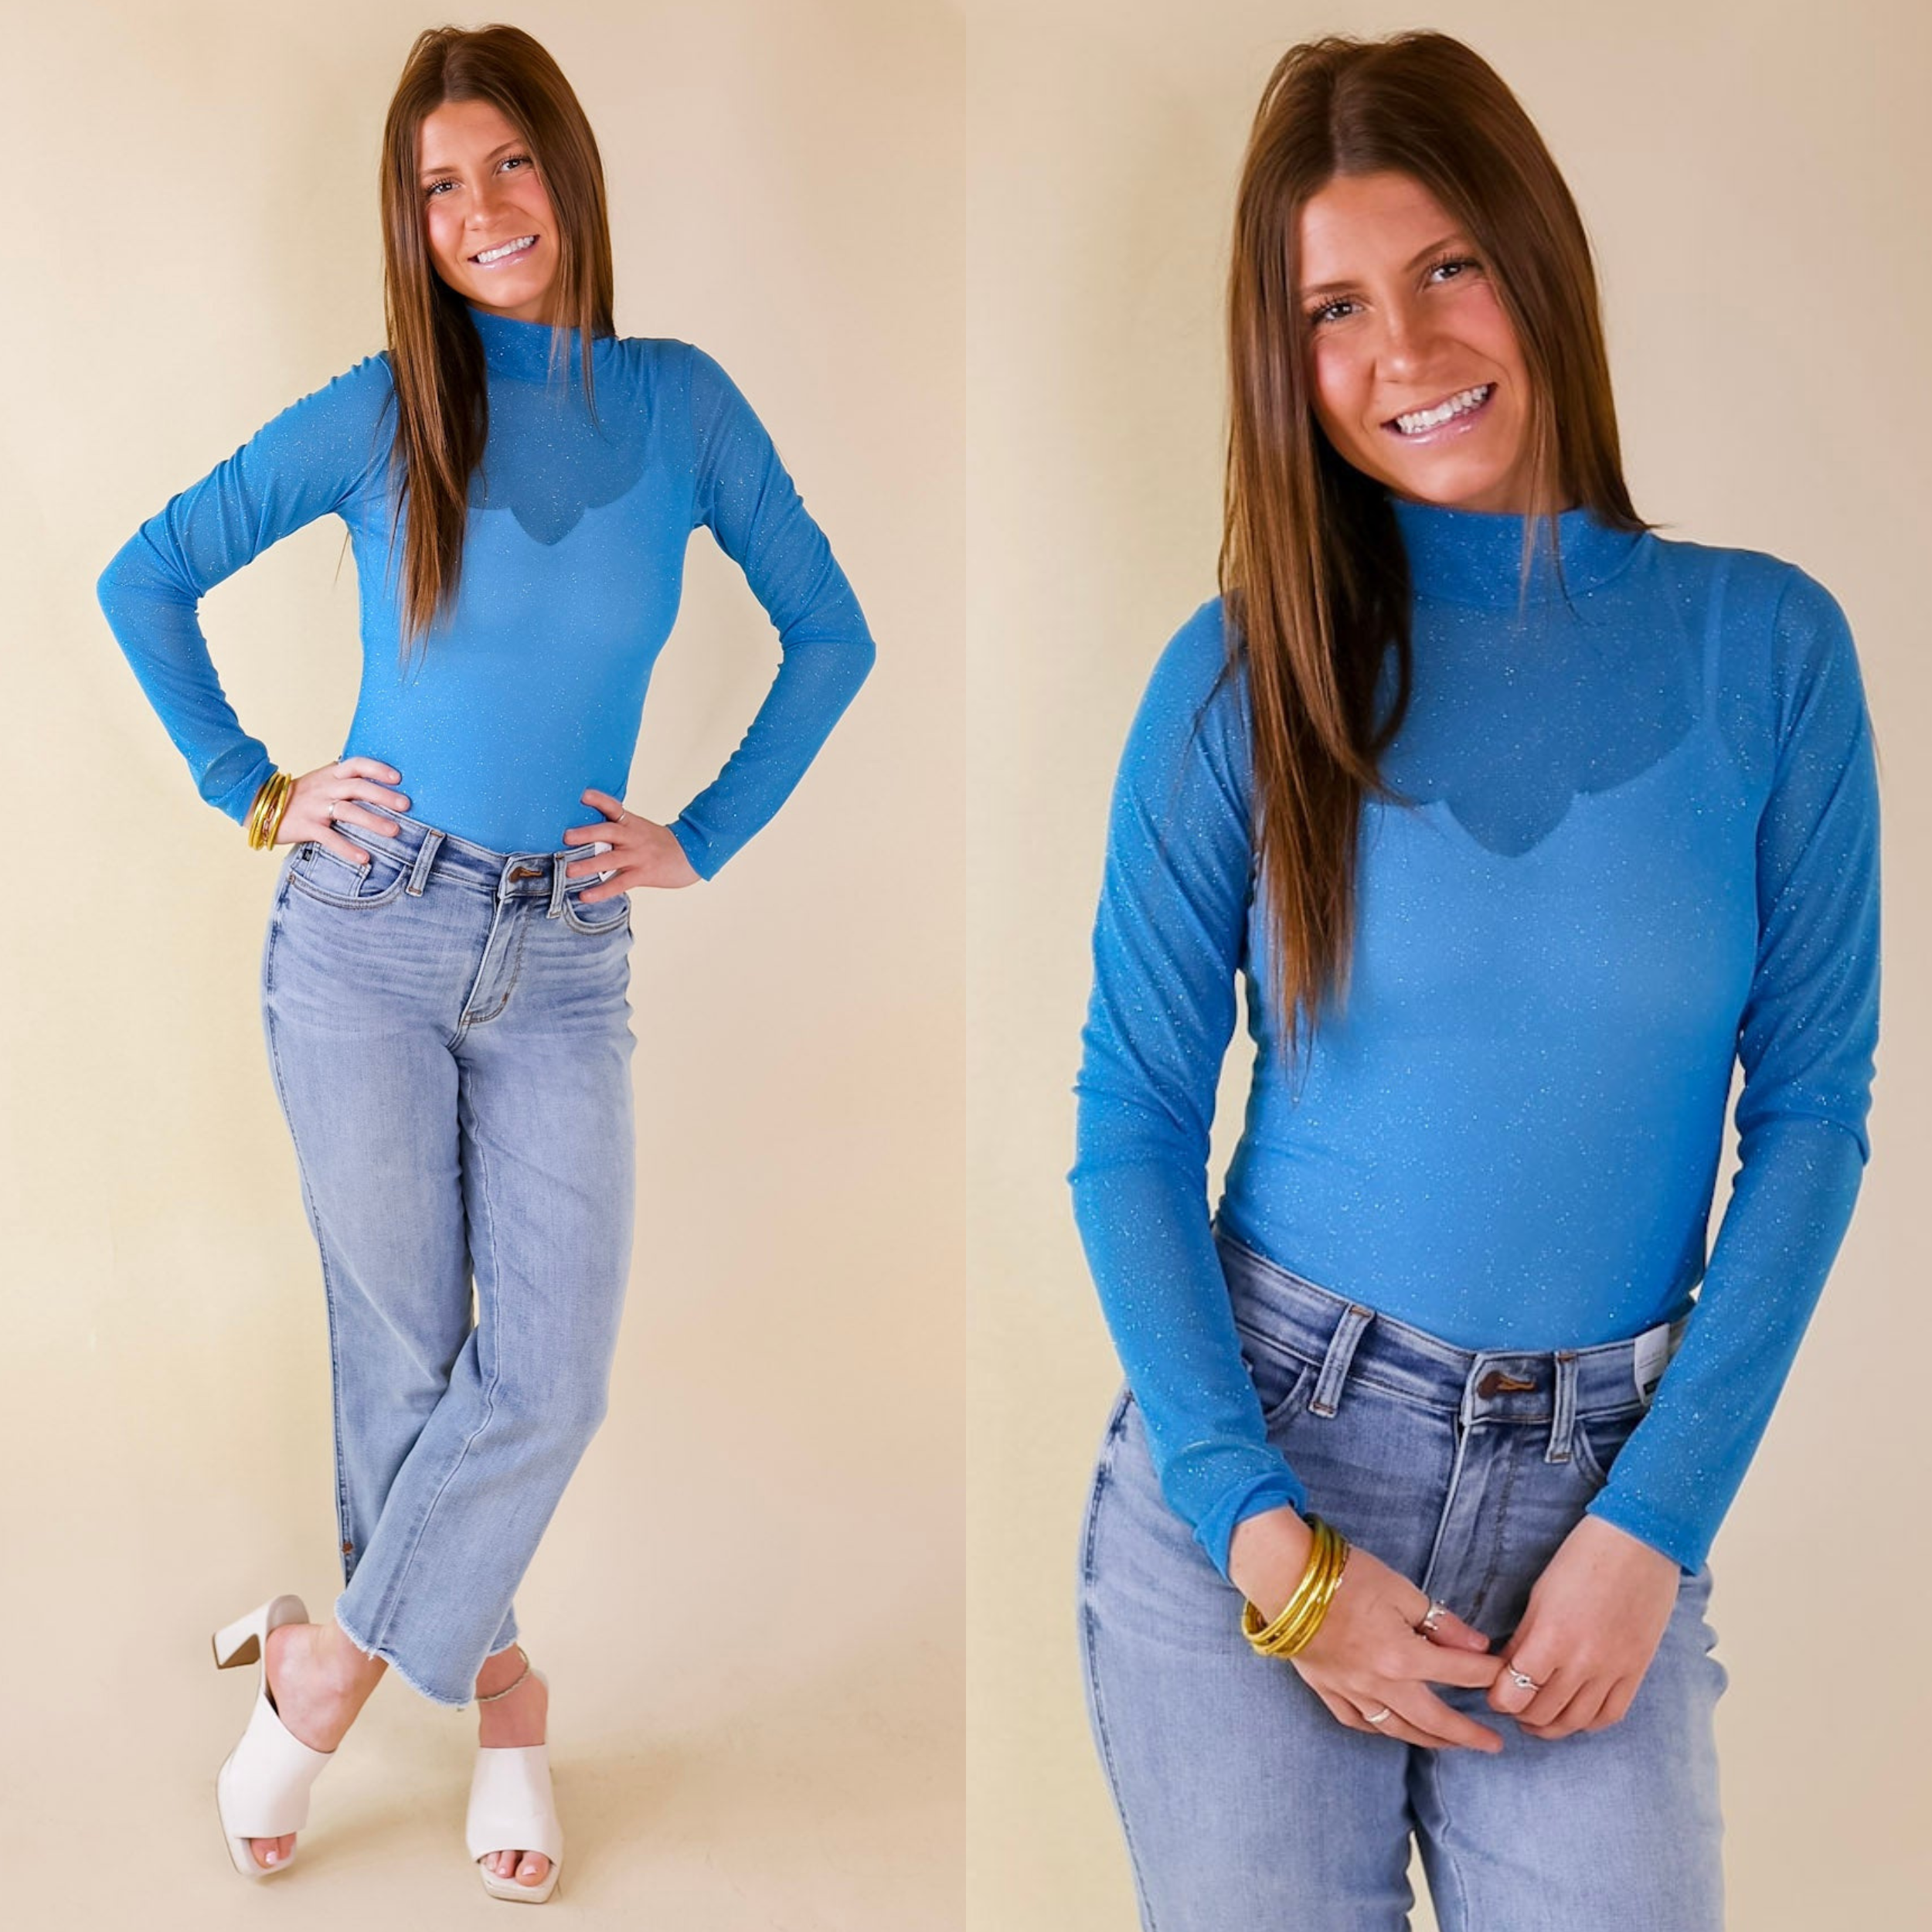 Try Your Luck Glitter Mesh Long Sleeve Bodysuit in Blue - Giddy Up Glamour Boutique